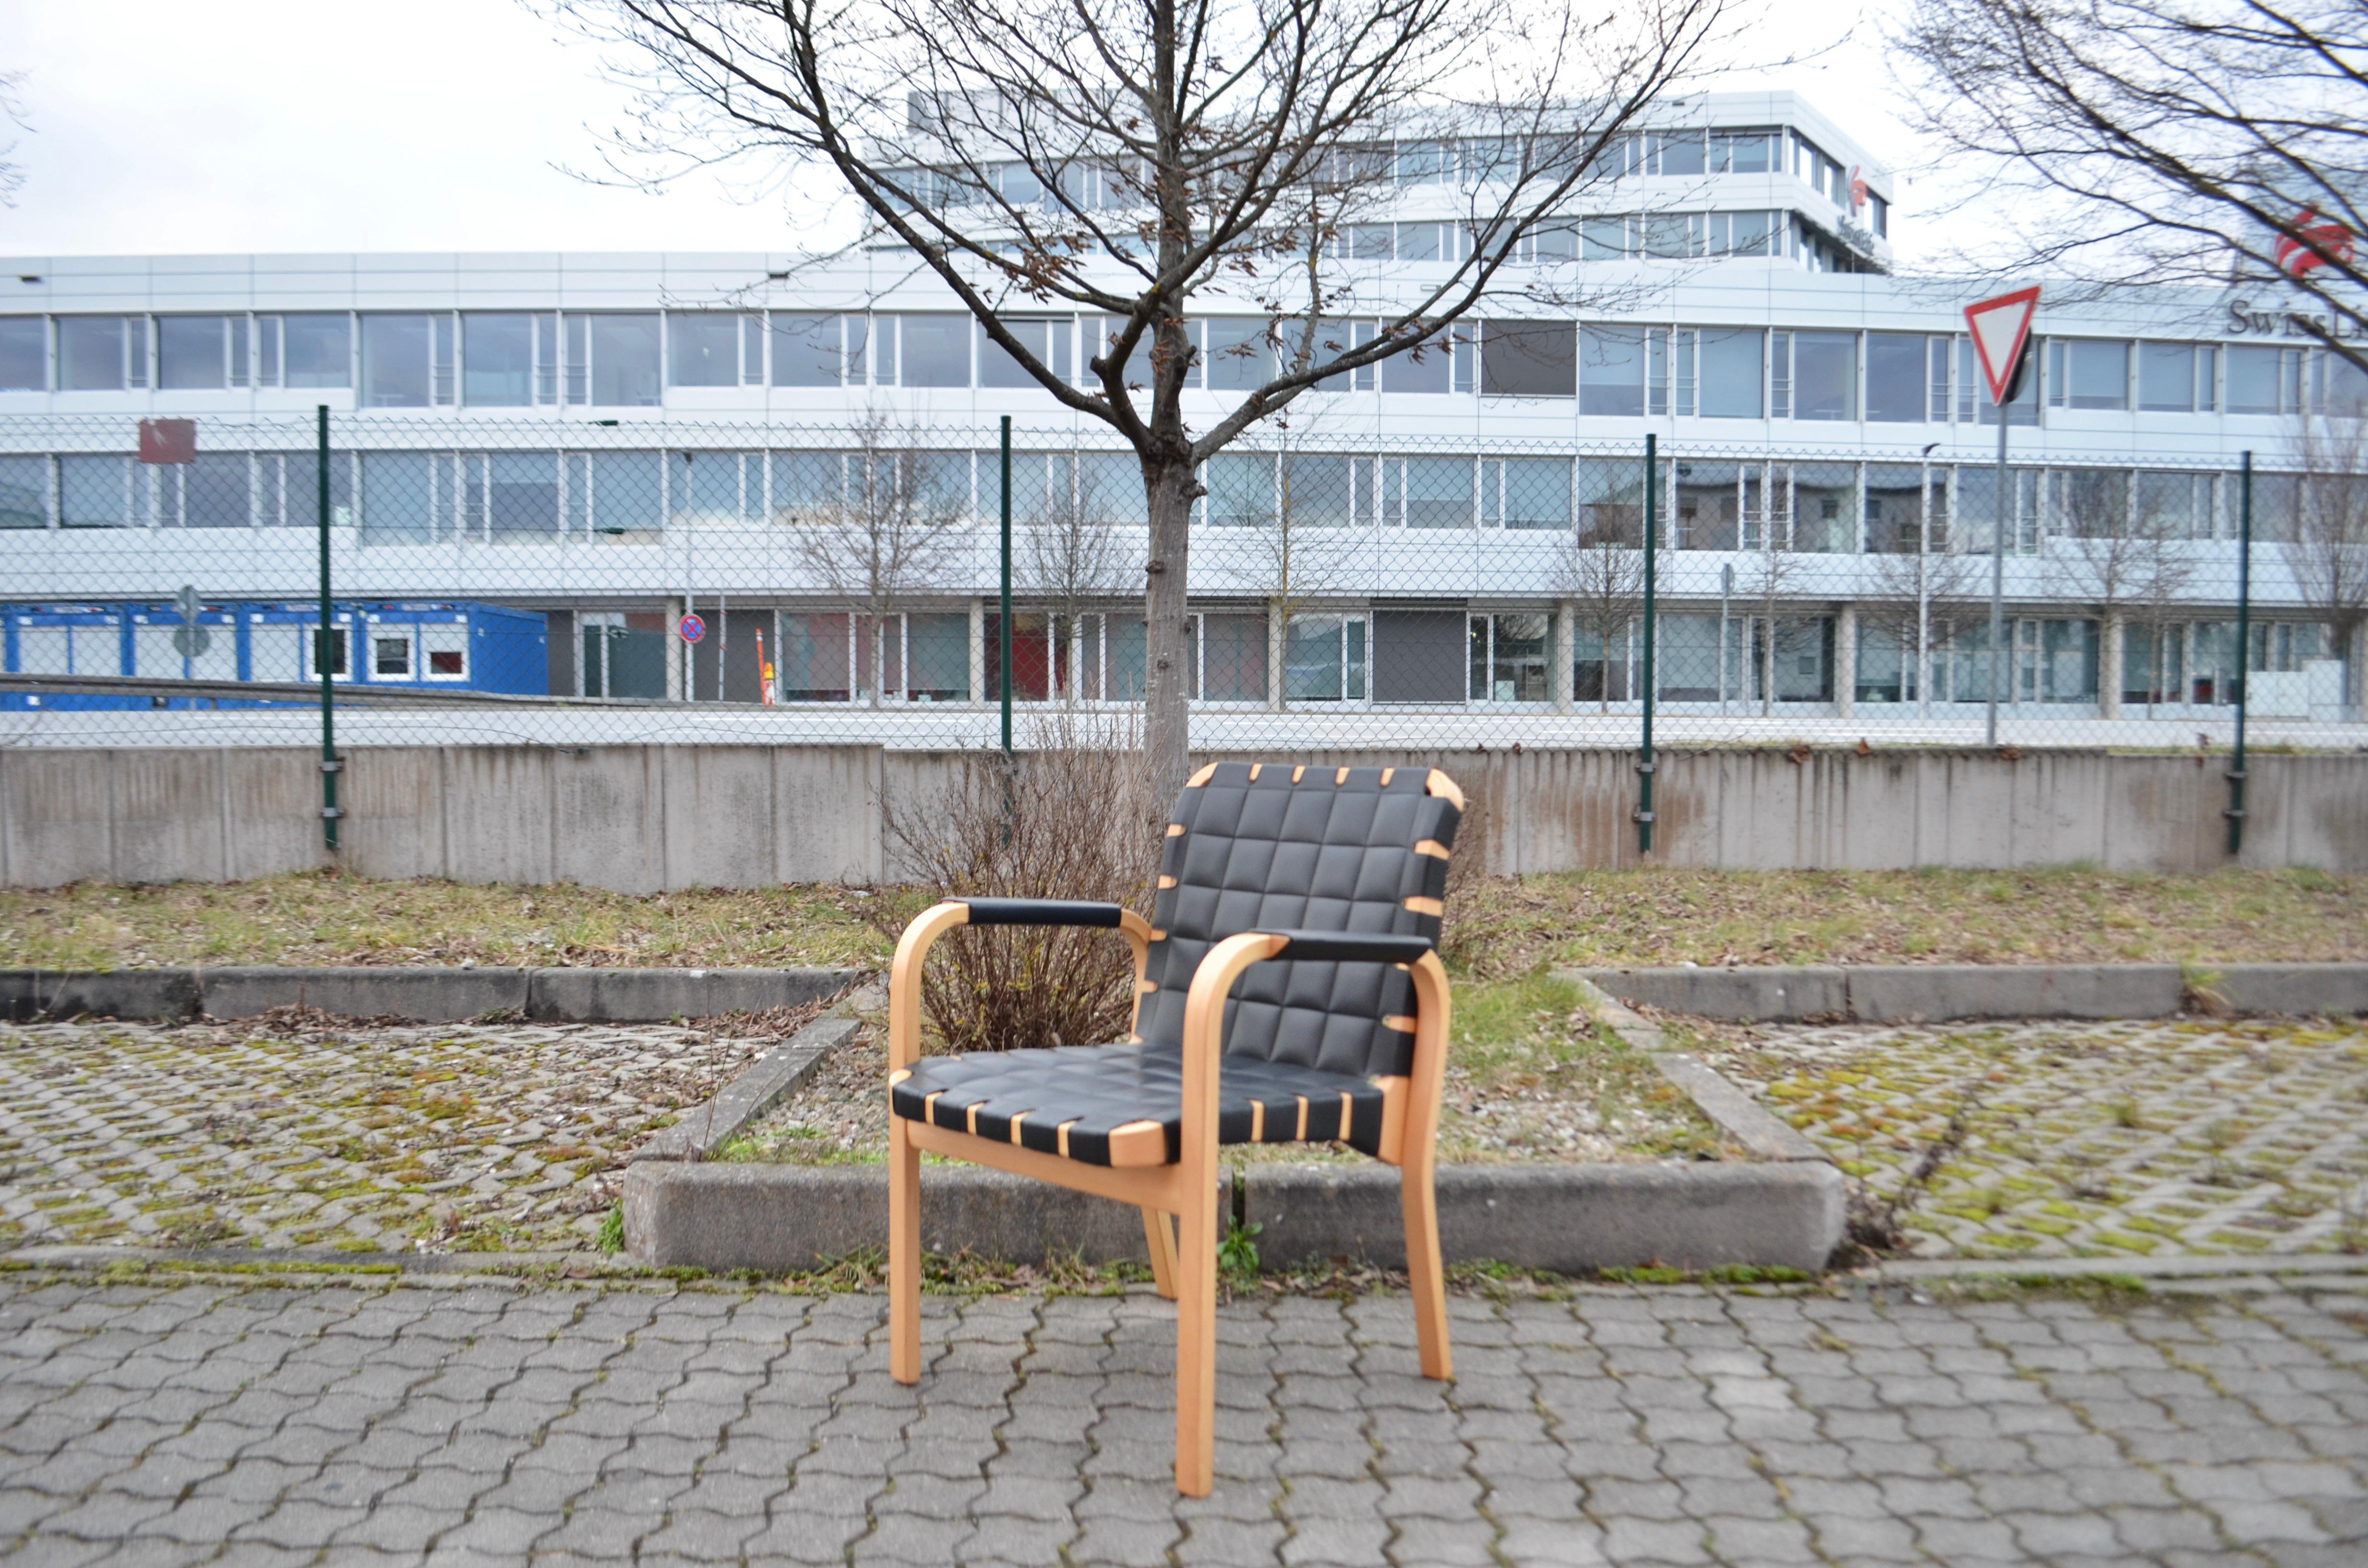 Rare armchair model 45 from Alvar Aalto made of laminated birch wood and black aniline leather.
Manufactured by Artek.
The chairs are very comfortable and lightweighted.
They are in best condtion.
It wasn't used often. Near mint